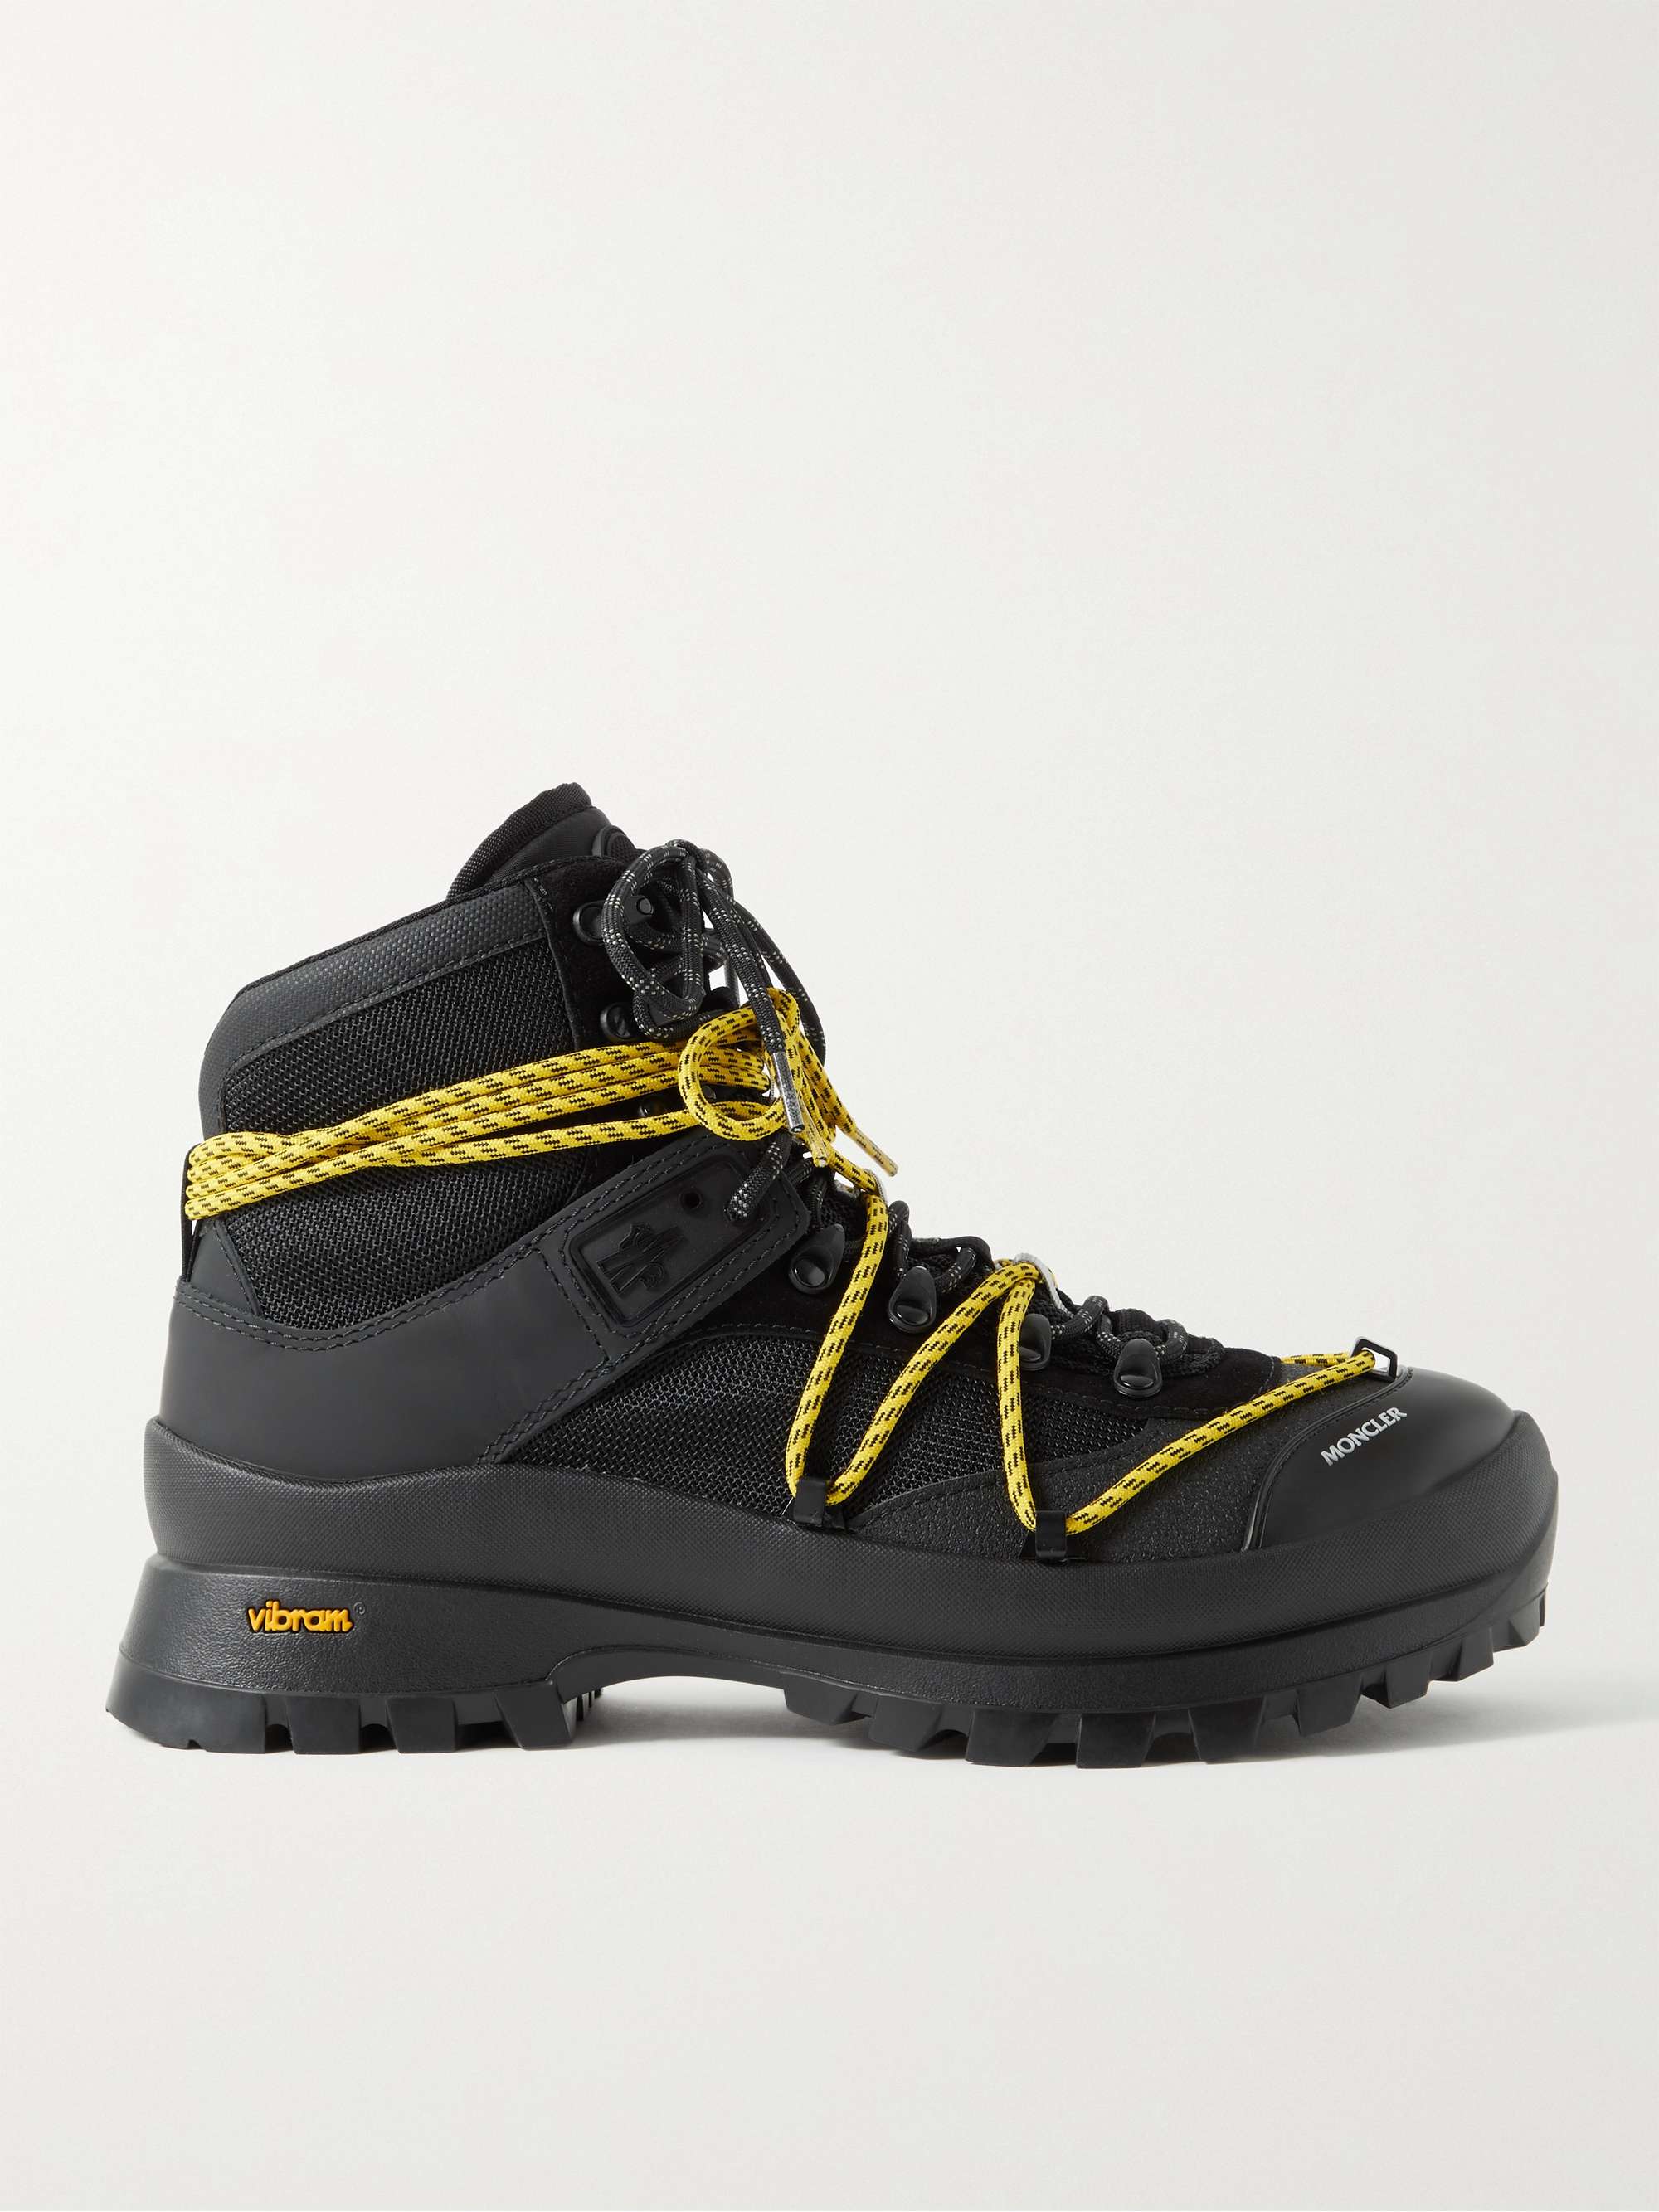 MONCLER Glacier Nylon, PU and Faux Leather Hiking Boots | MR PORTER